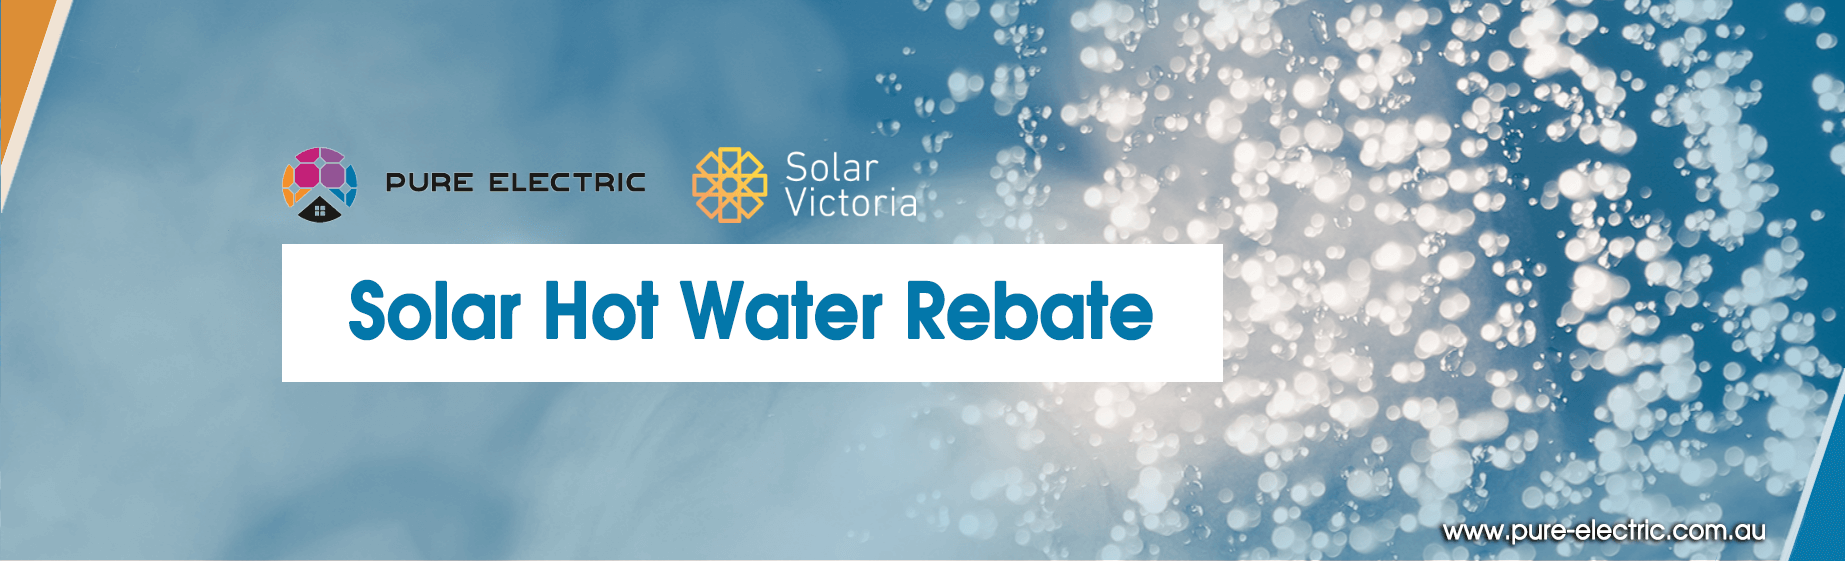 Solar Victoria Solar Hot Water Rebate Up To 1000 For Vic Customers 